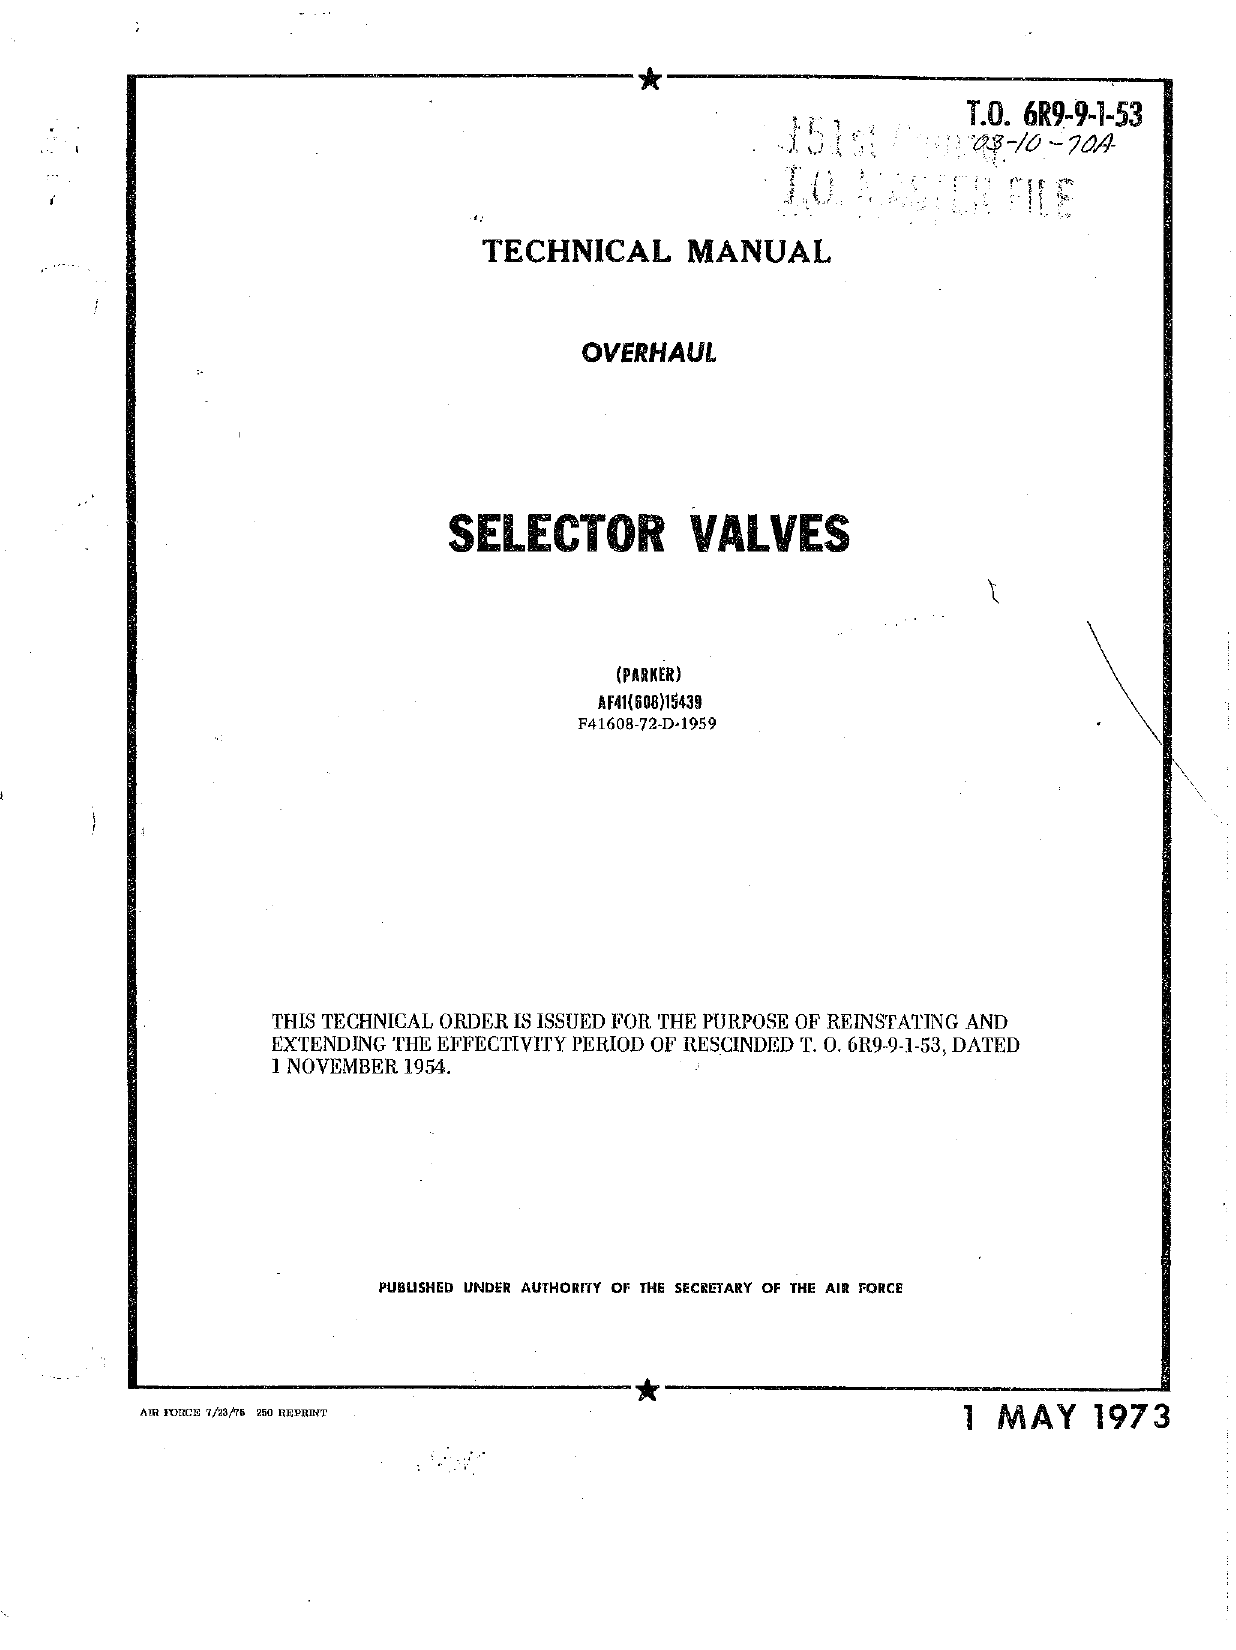 Sample page 1 from AirCorps Library document: Technical Manual for Selector Valves